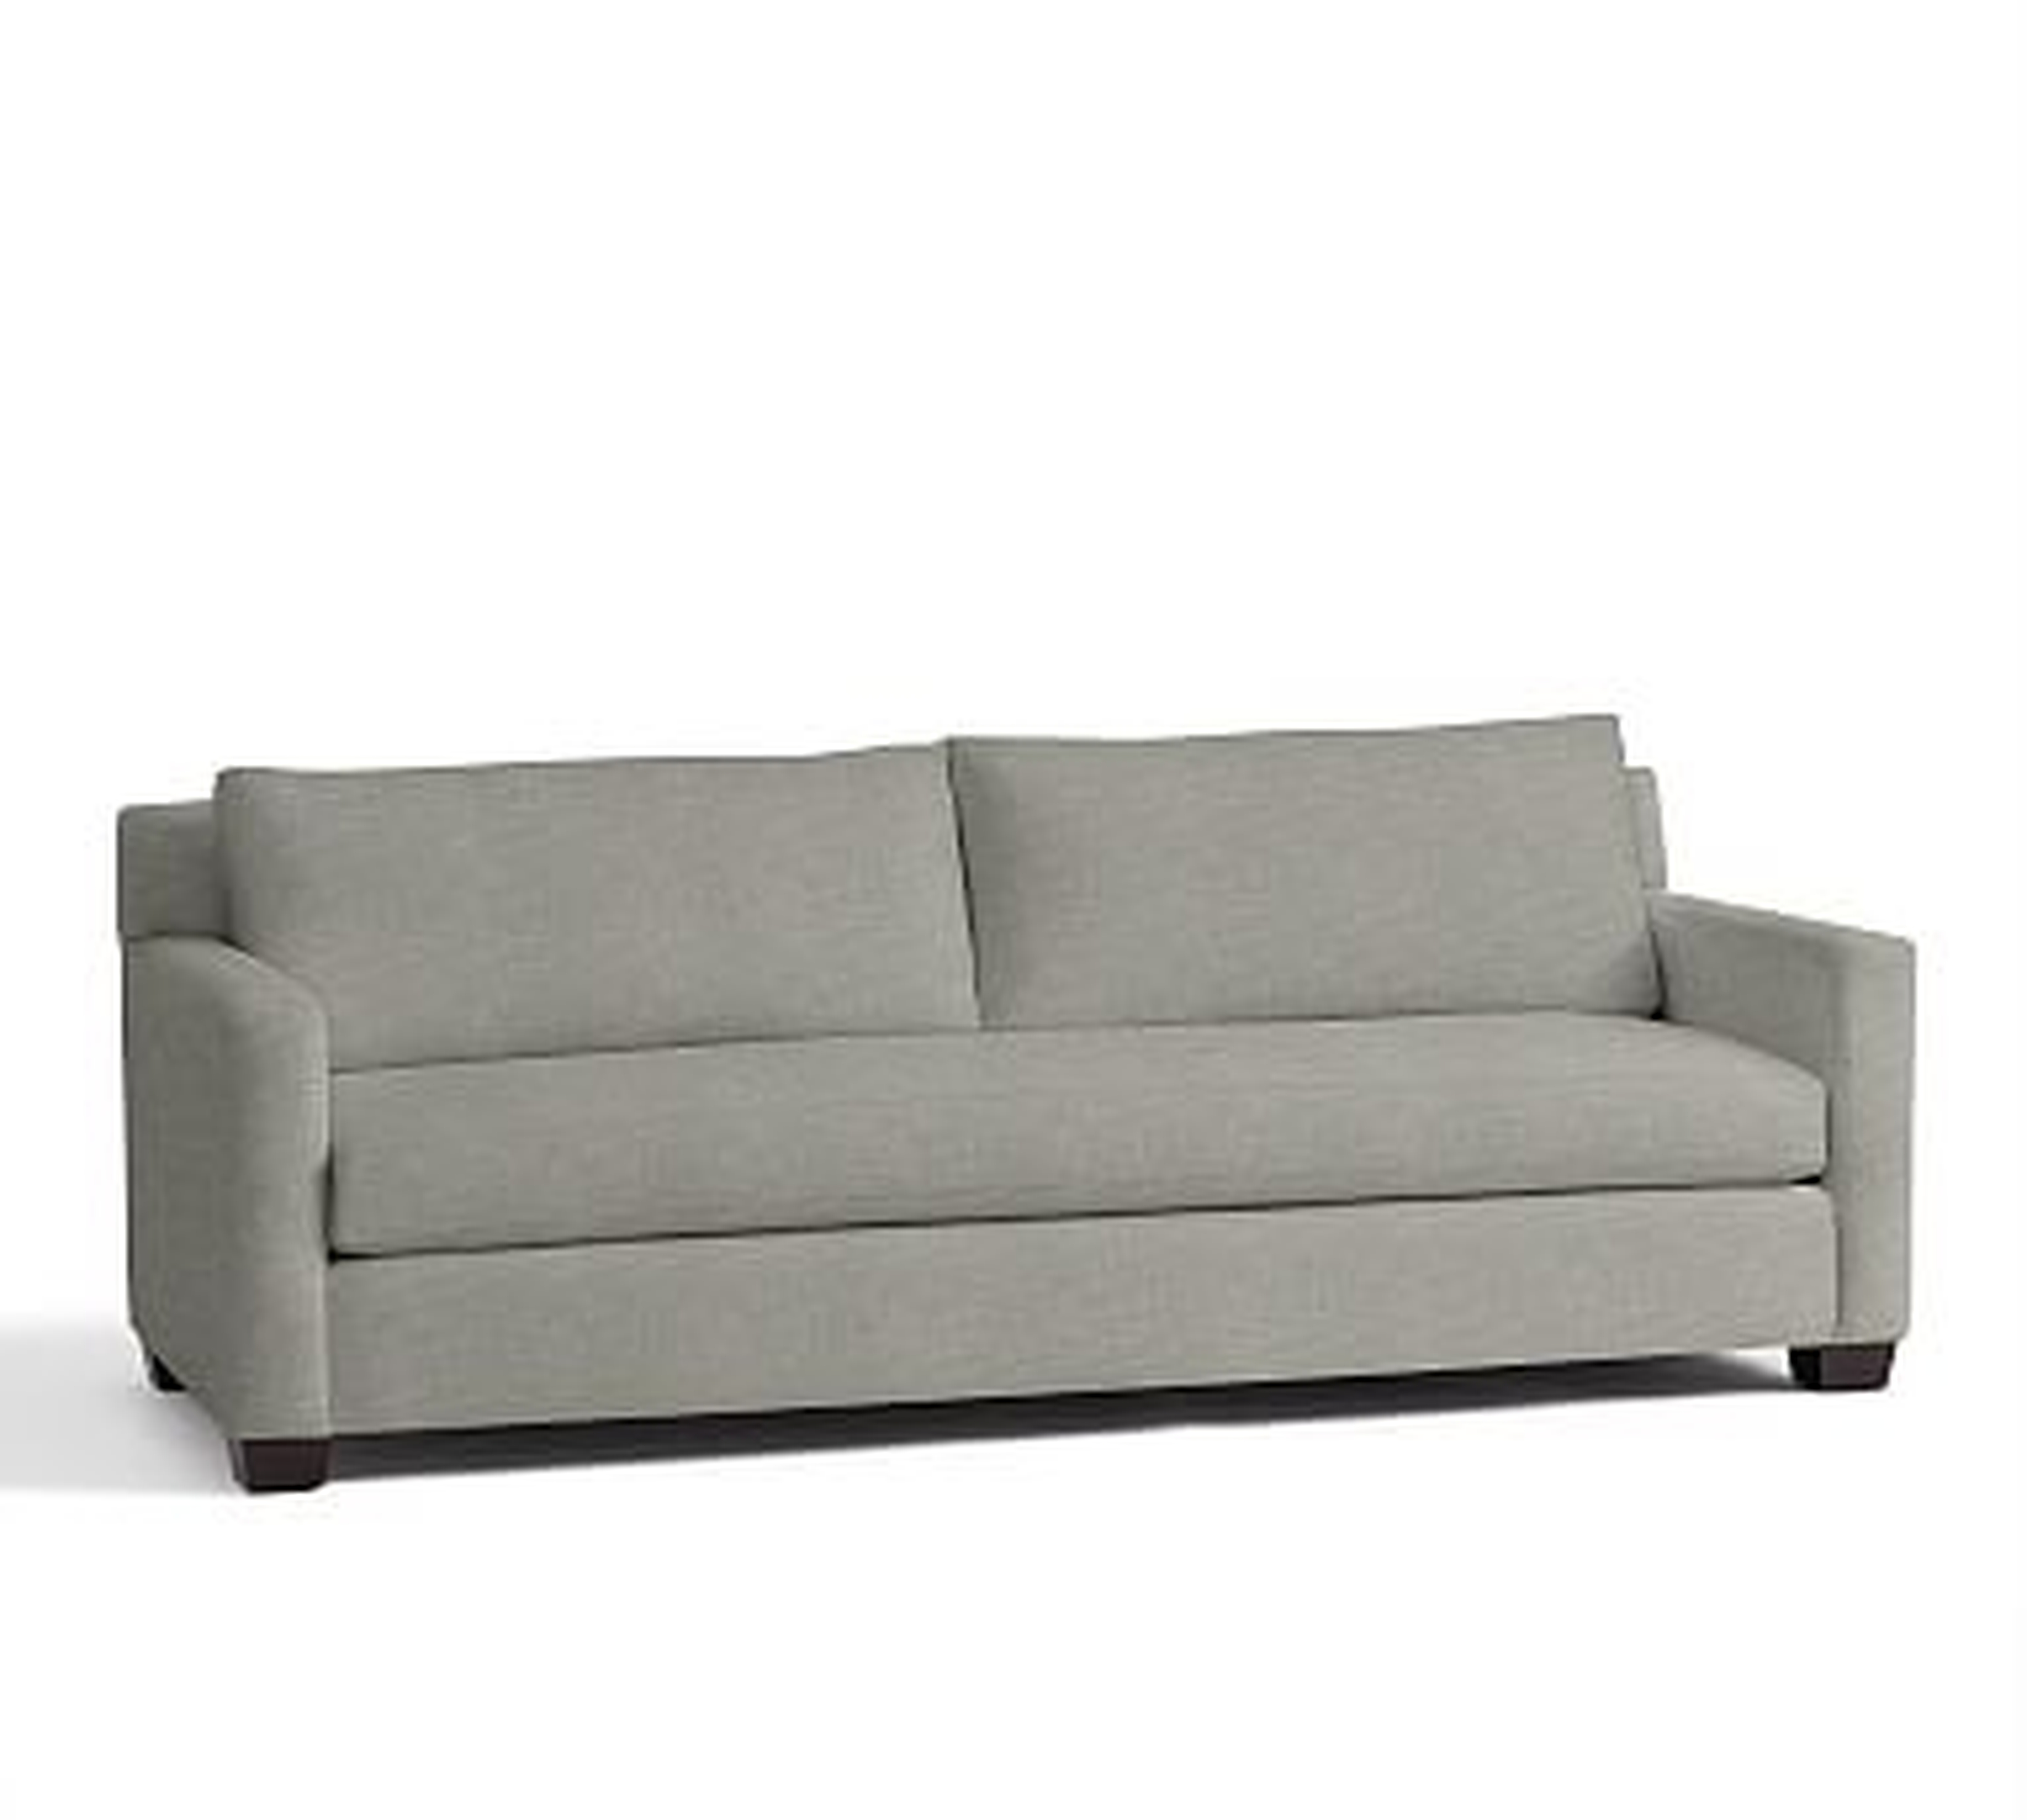 York Square Arm Upholstered Grand Sofa 95.5" with Bench Cushion, Down Blend Wrapped Cushions, Premium Performance Basketweave Light Gray - Pottery Barn